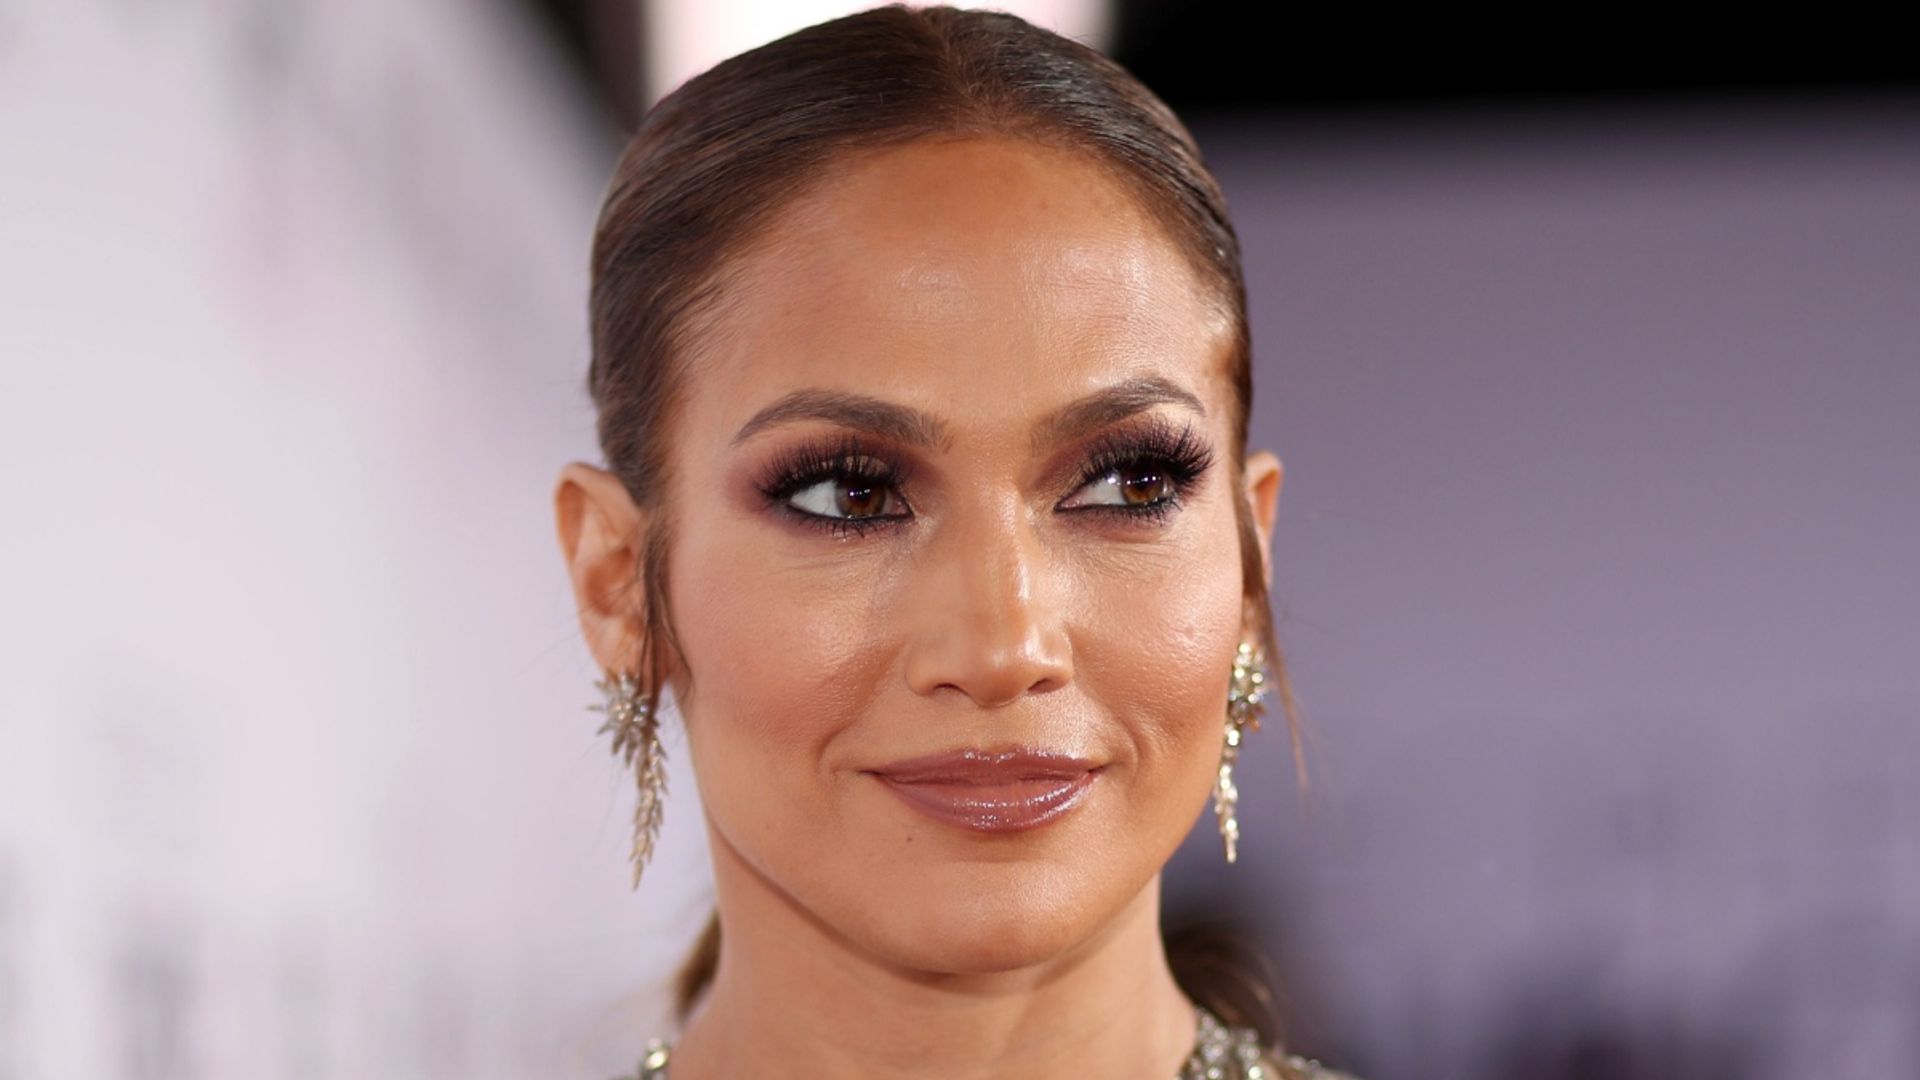 Jennifer Lopez's new film paused after Covid-19 outbreak